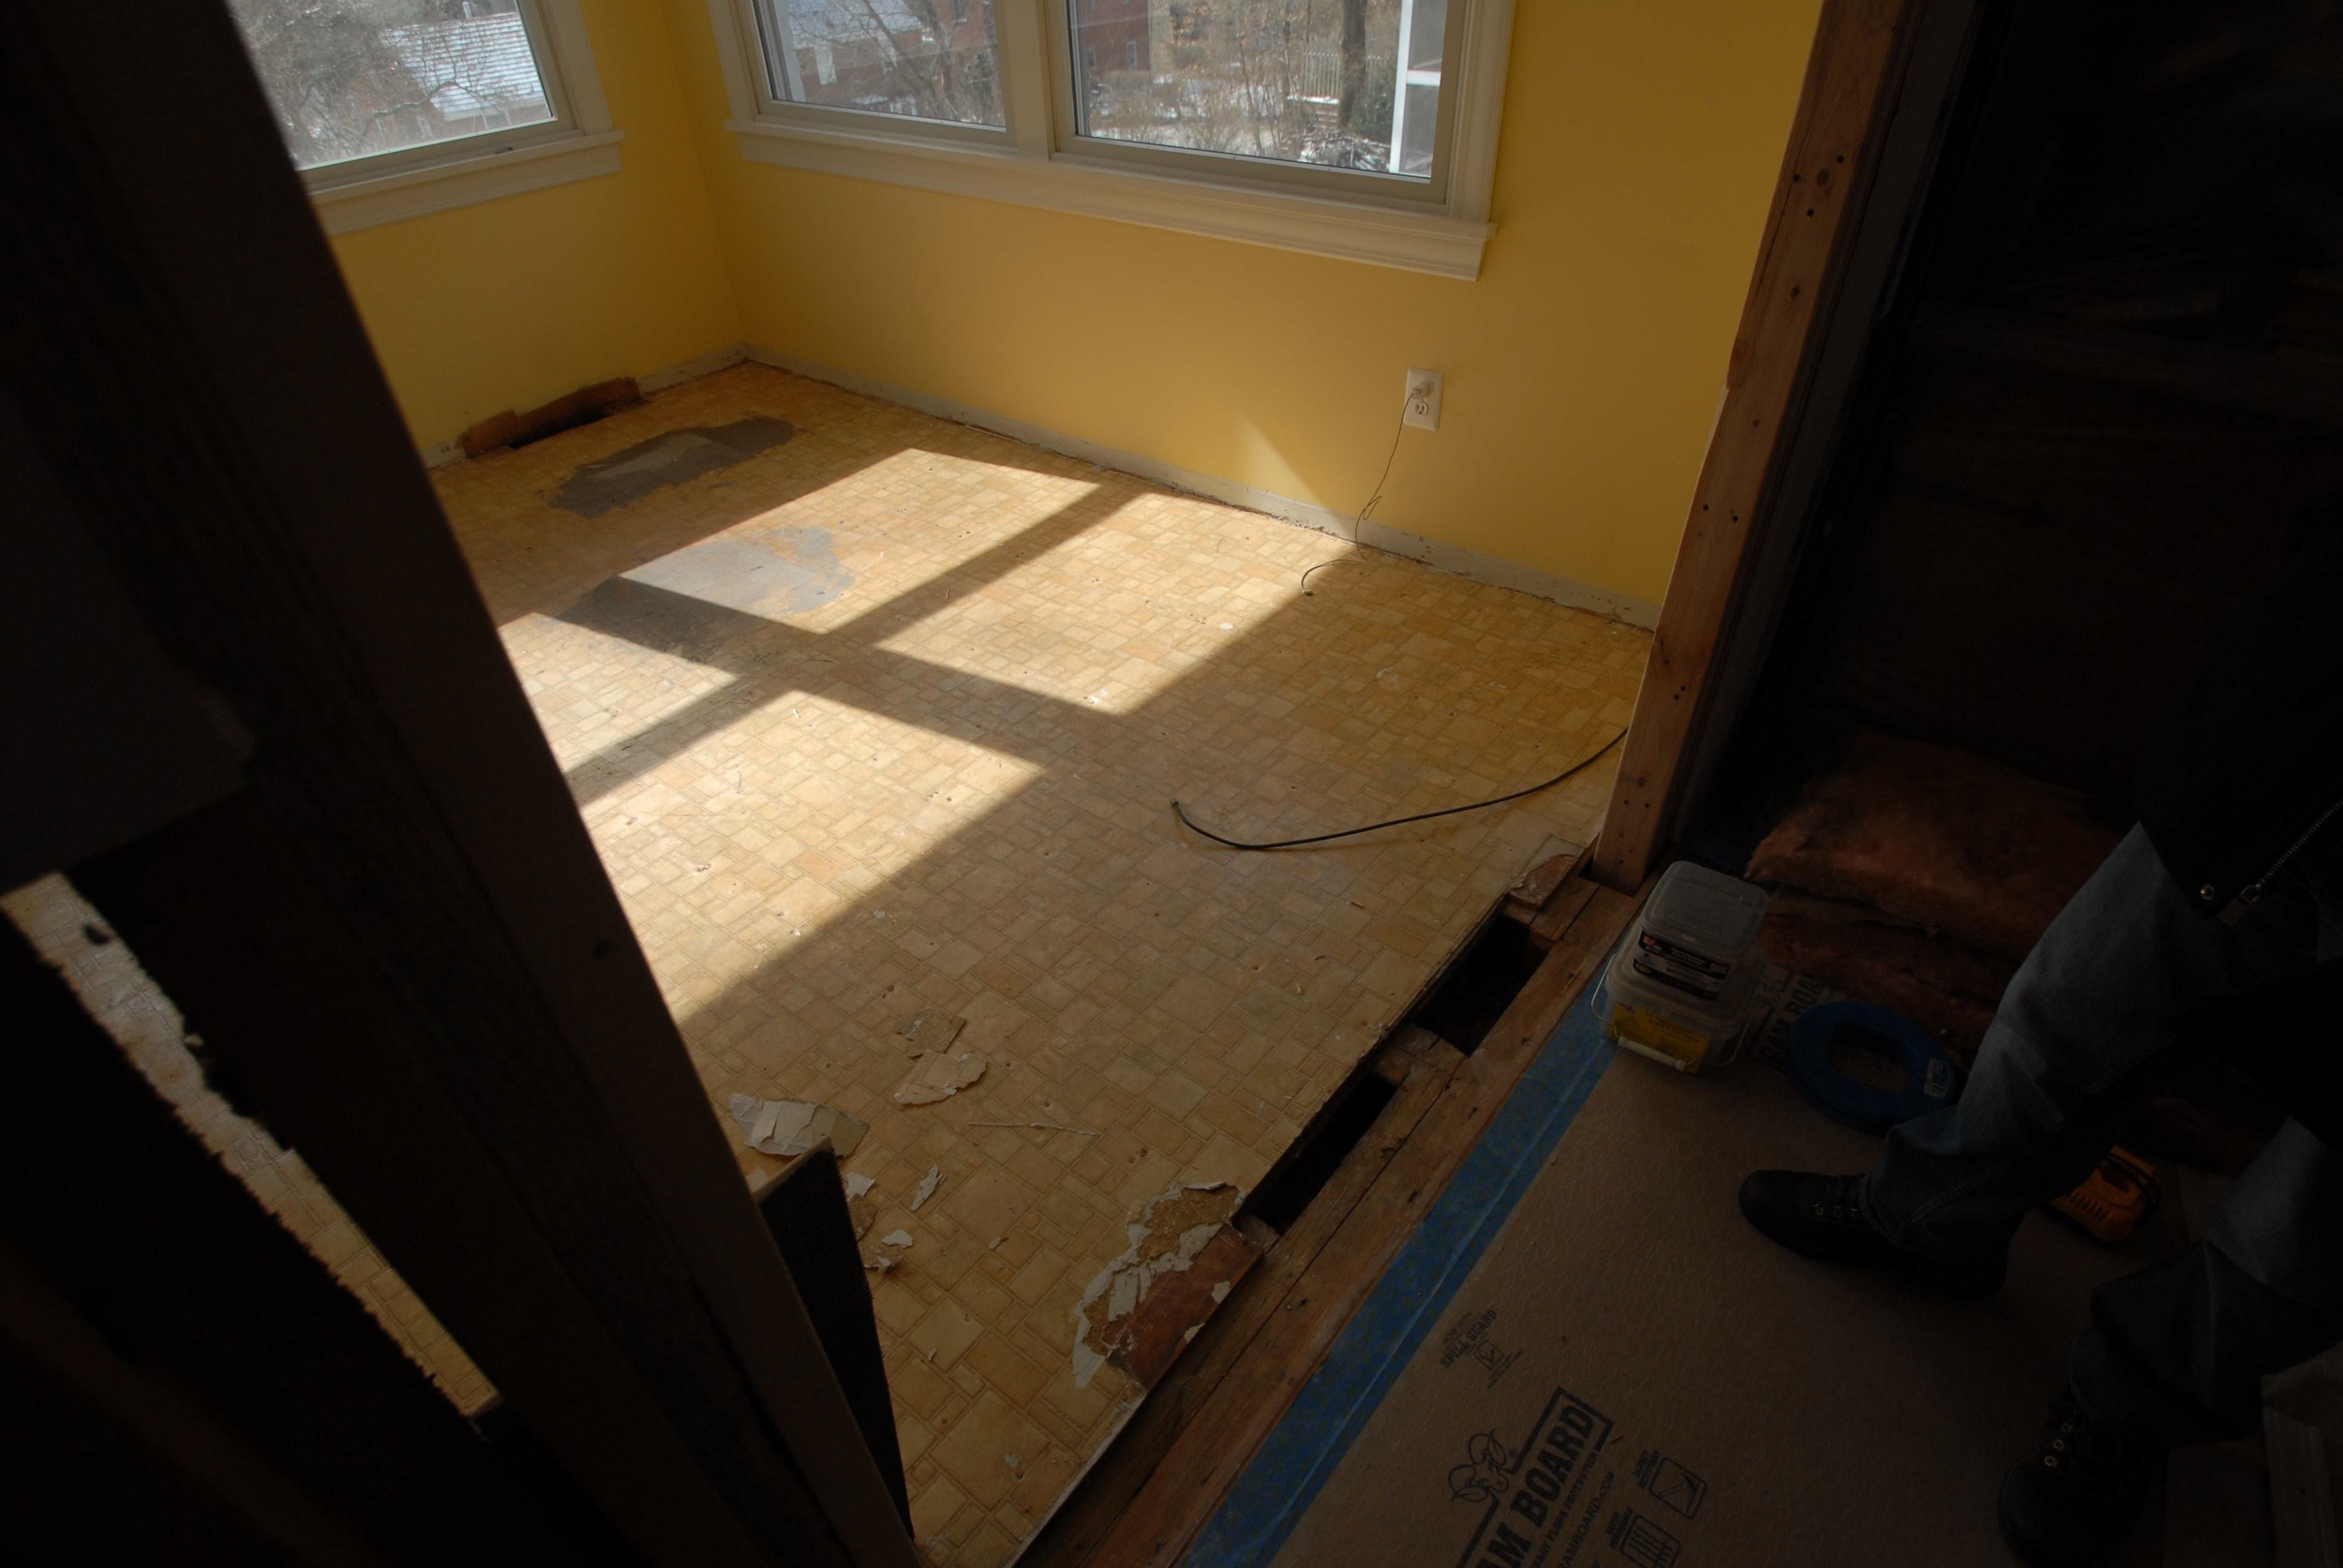 DURING: New opening from living room to breakfast nook